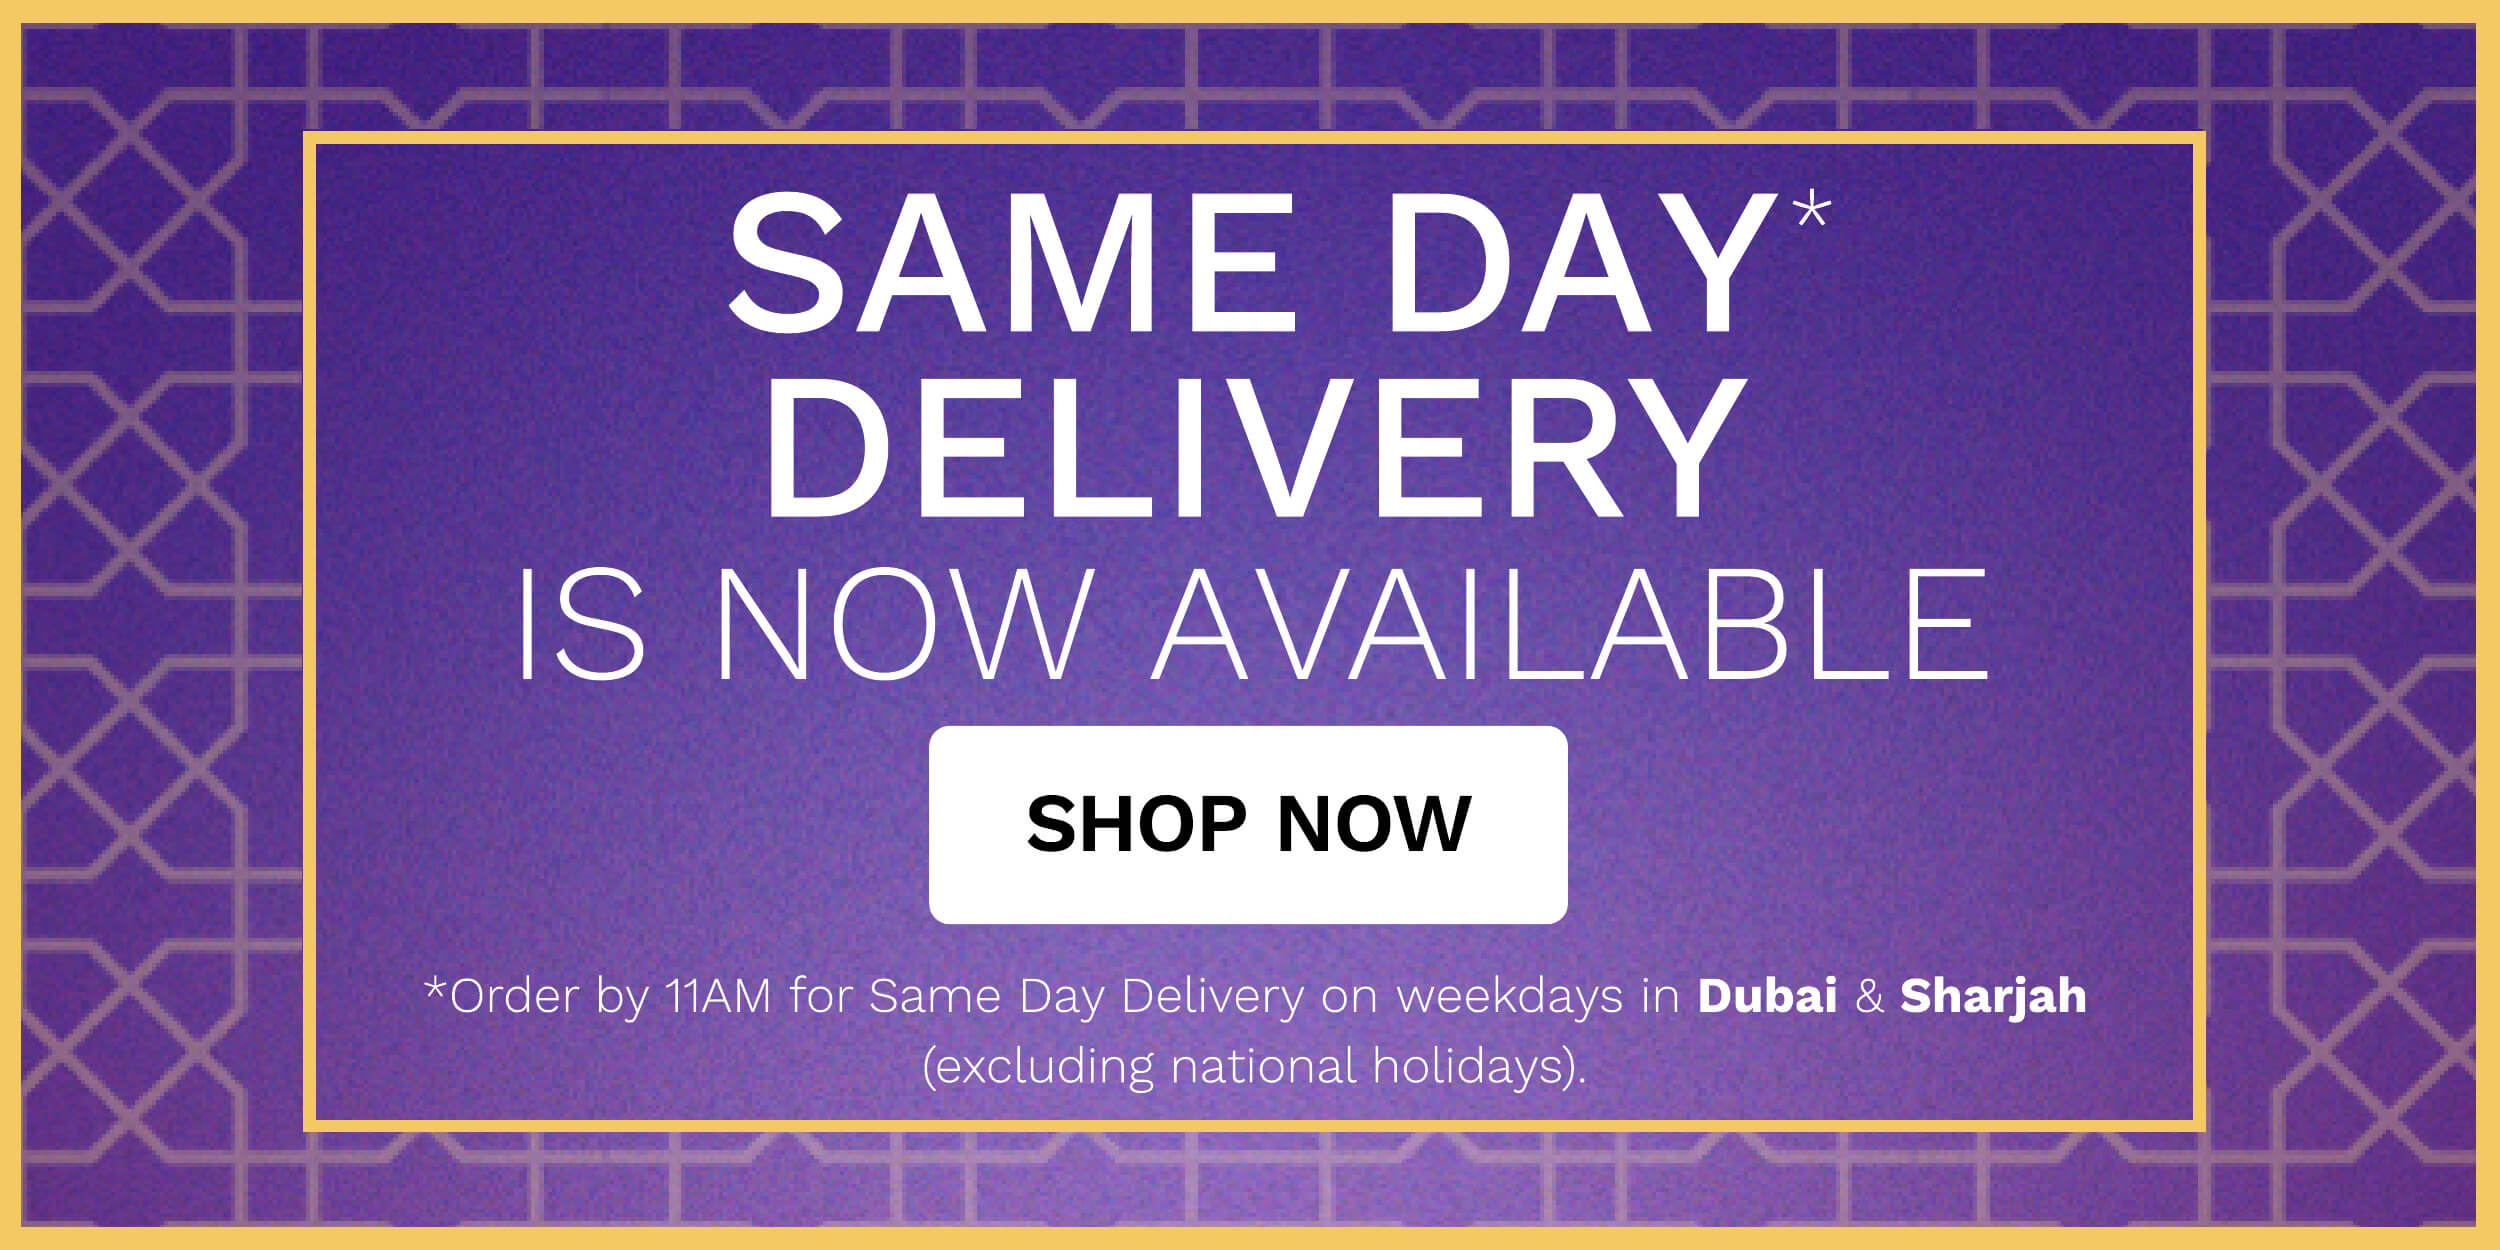 SAME DAY DELIVERY IS NOW AVAILABLE SHOP NOW *Order by 1AM for Same Dayr Deki.tvery on weekdays in Dubai Sharjah excluding national holidays. 